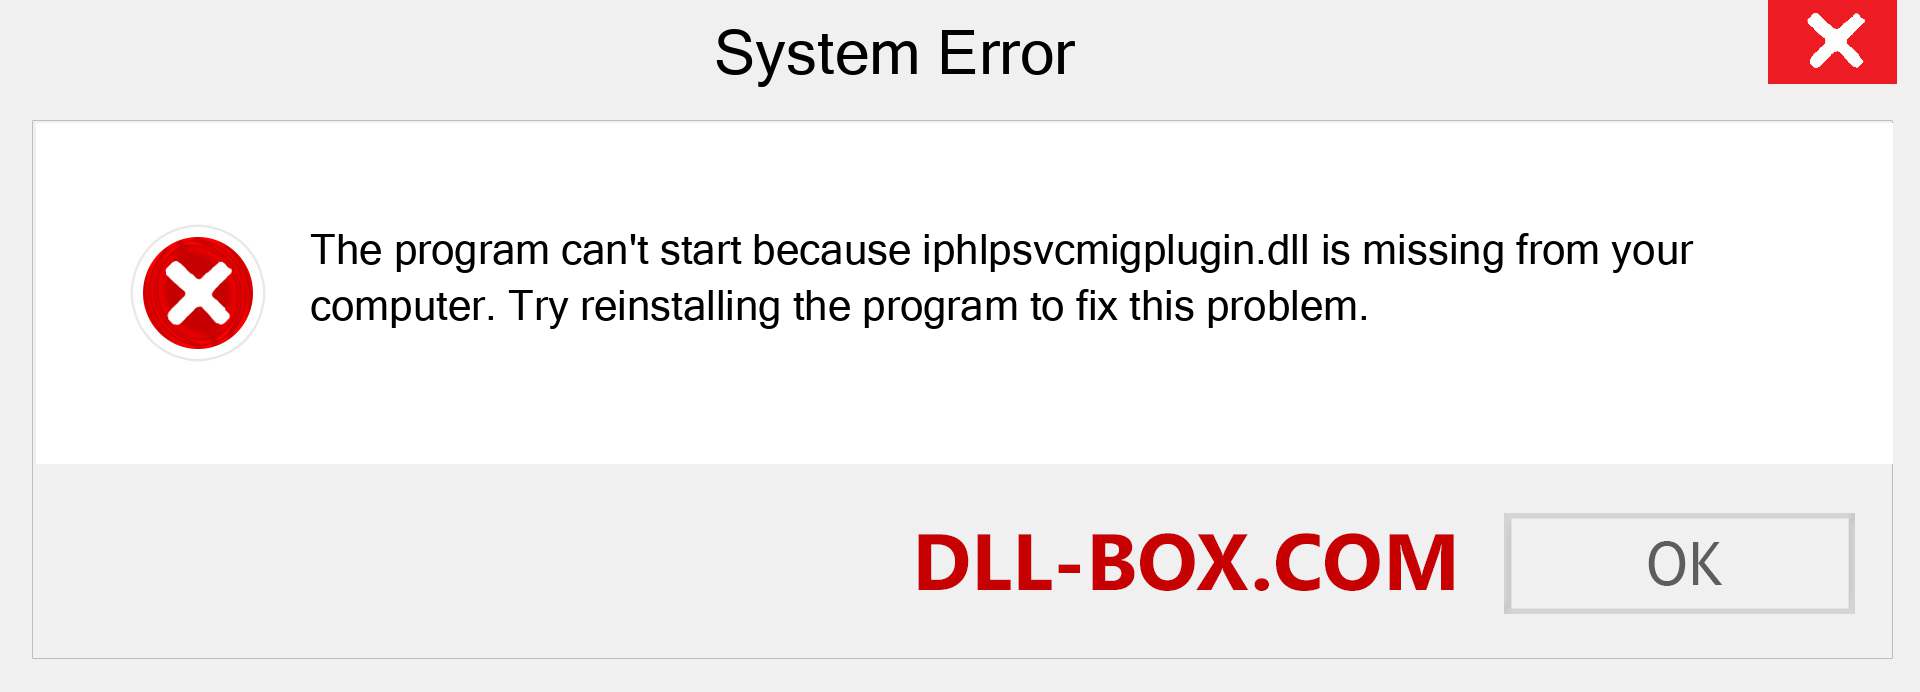  iphlpsvcmigplugin.dll file is missing?. Download for Windows 7, 8, 10 - Fix  iphlpsvcmigplugin dll Missing Error on Windows, photos, images